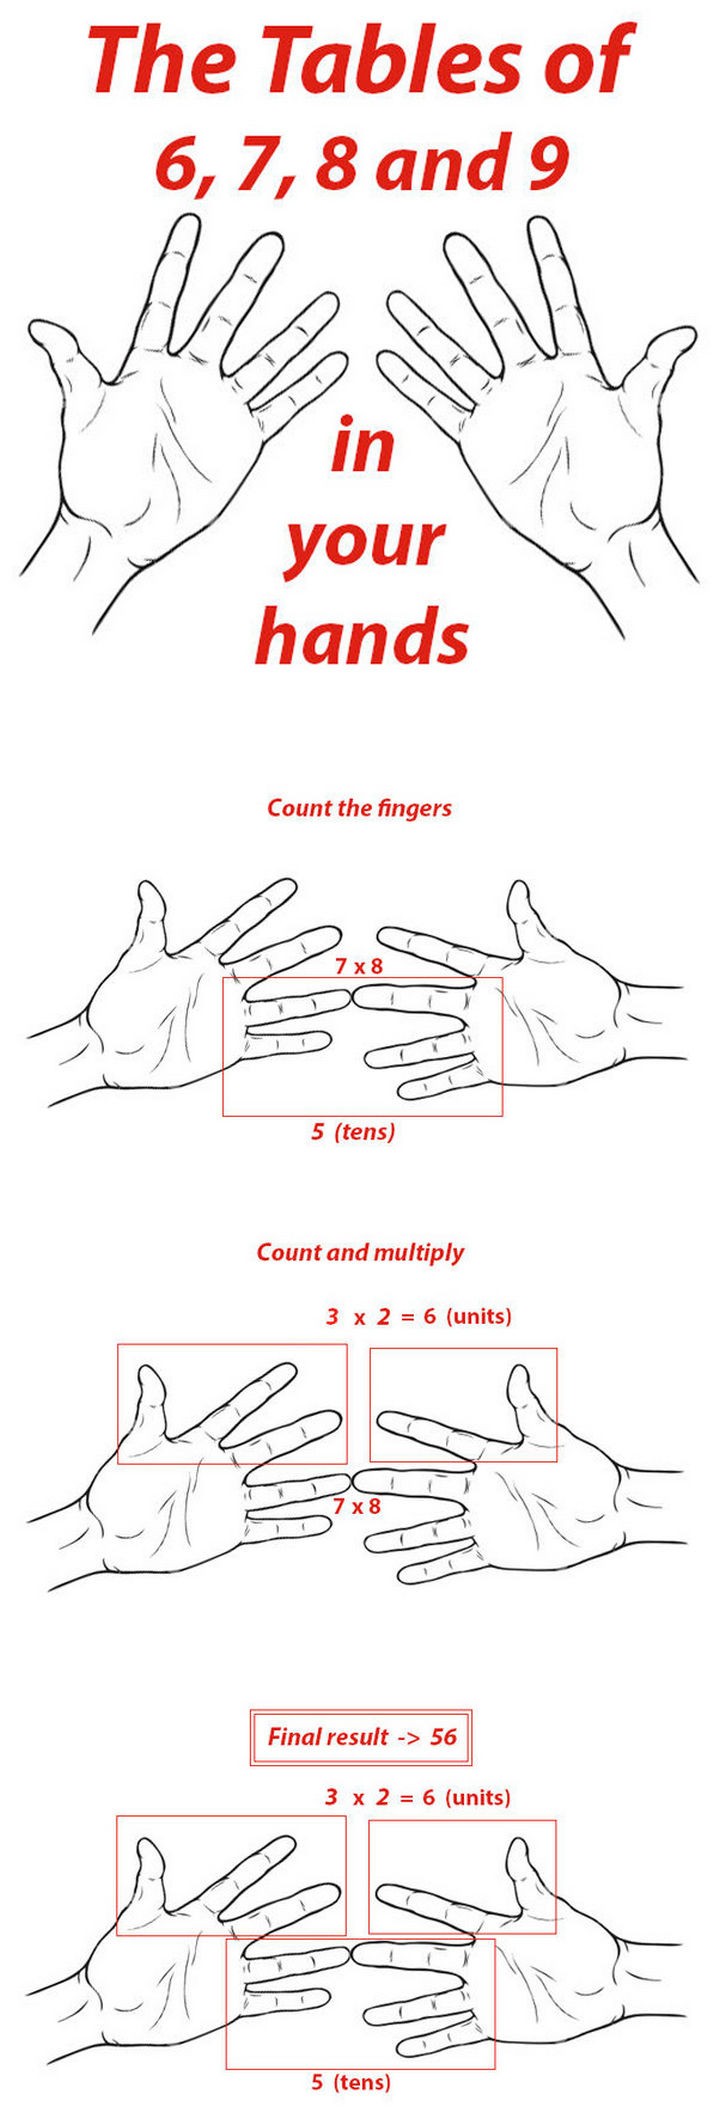 10 Math Tricks - How To Use Your Hands For 5, 6, and 9 Times Tables.